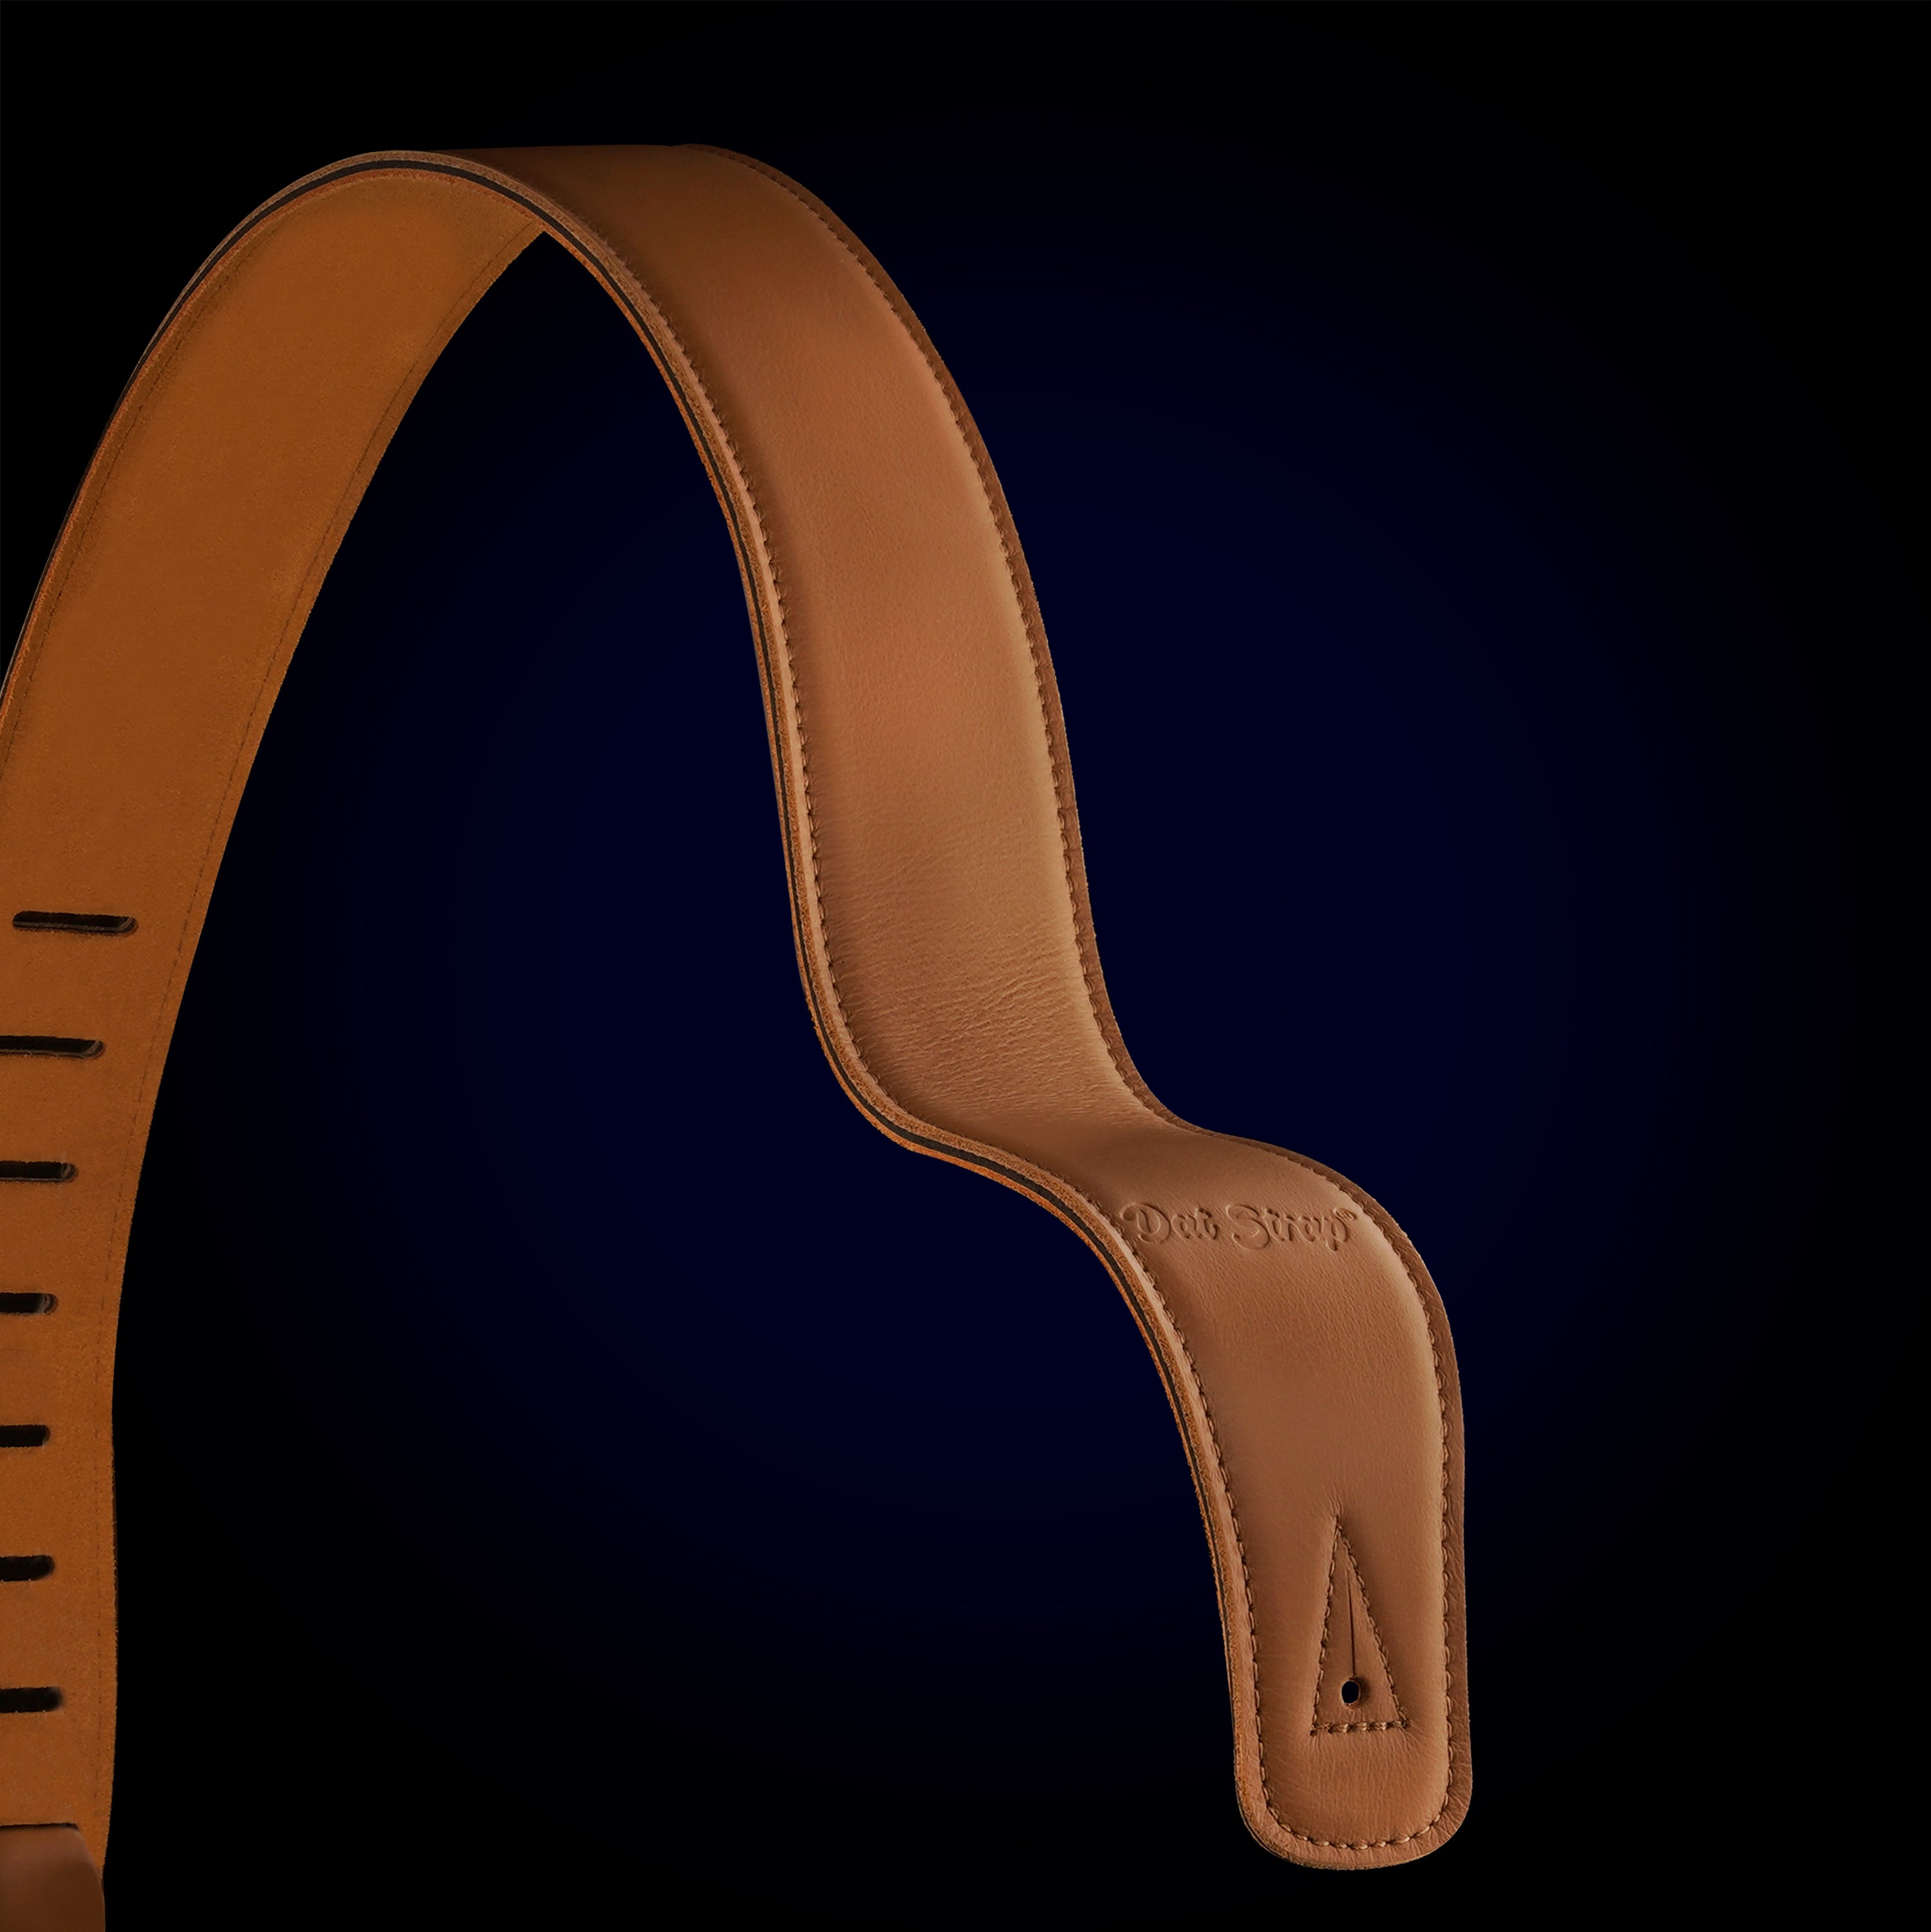 Dat Strap Leather Guitar Strap - Light Brown